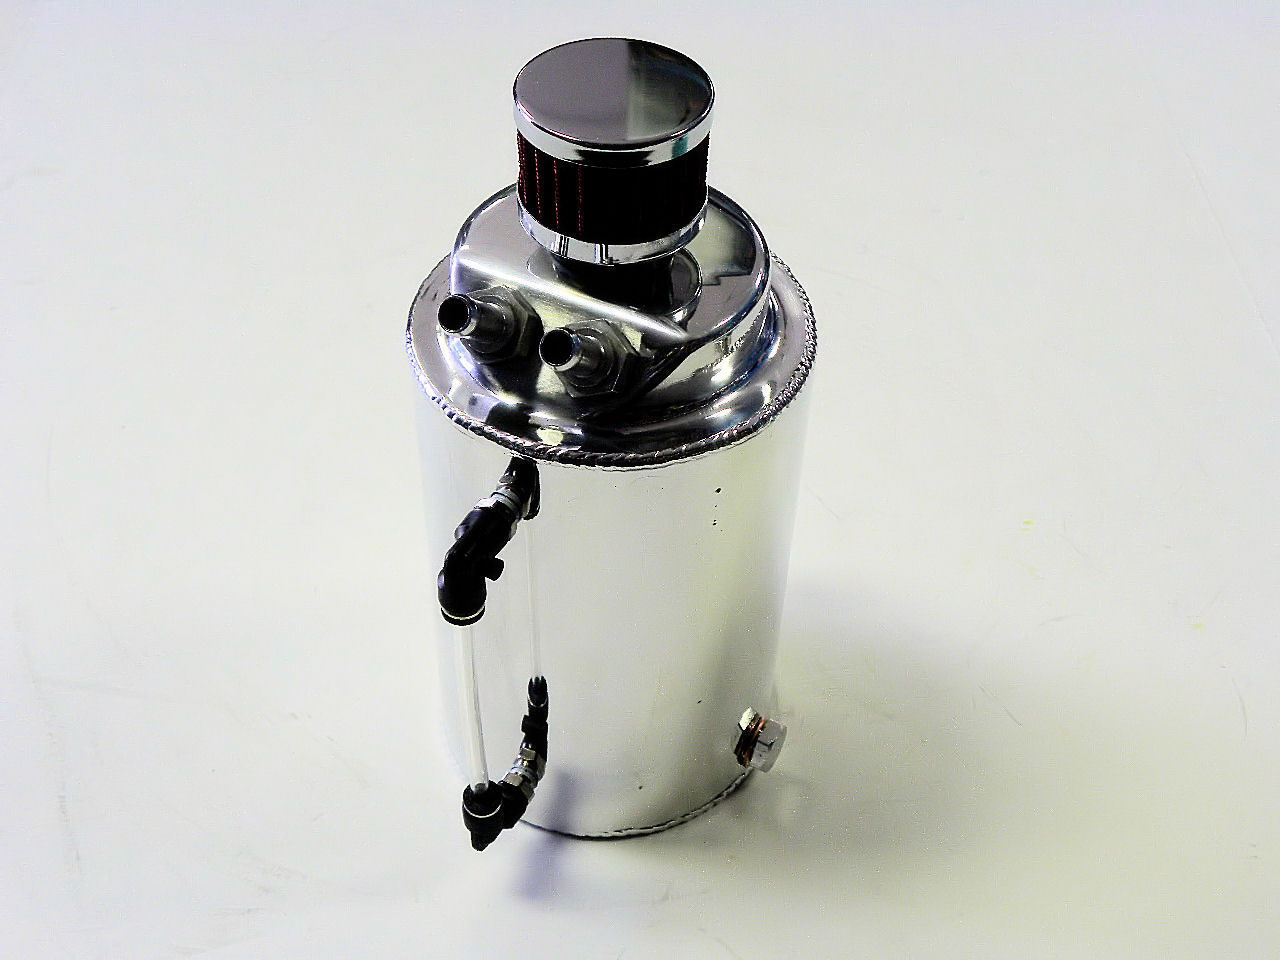 VMS POLISHED ALUMINUM 2 LITER OIL RESERVOIR CATCH CAN TANK WITH BREATHER FILTER